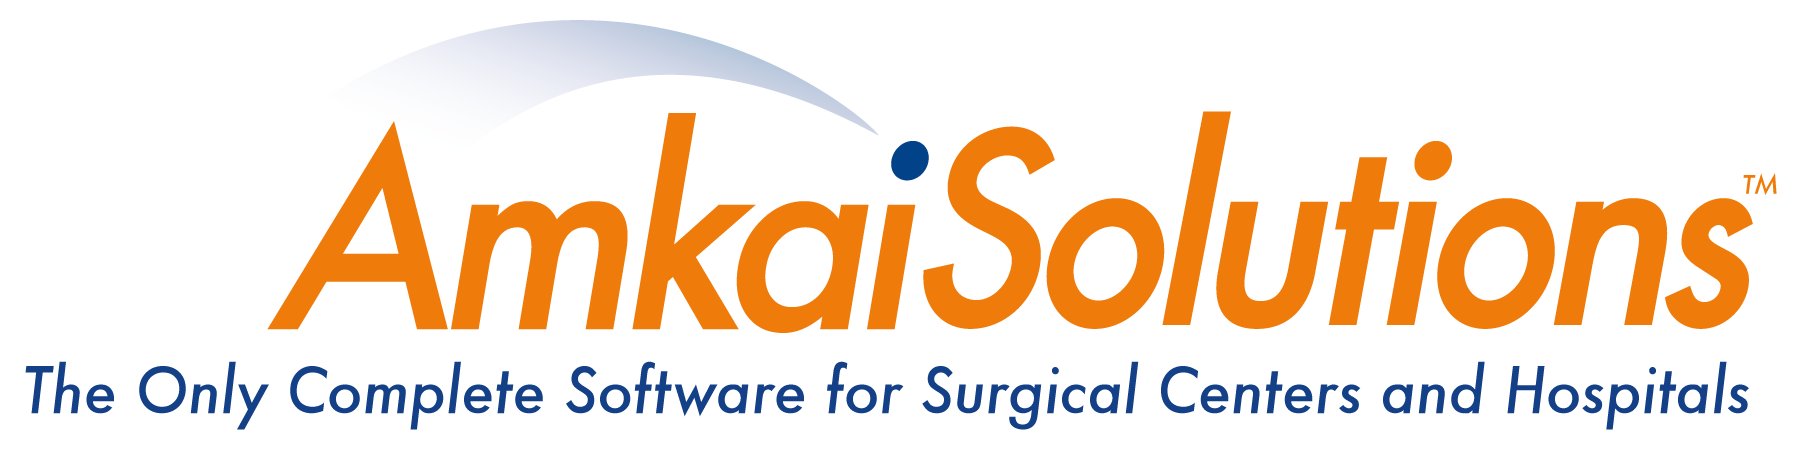 AmkaiSolutions: The Only Complete Software for Surgical Centers and Hospitals